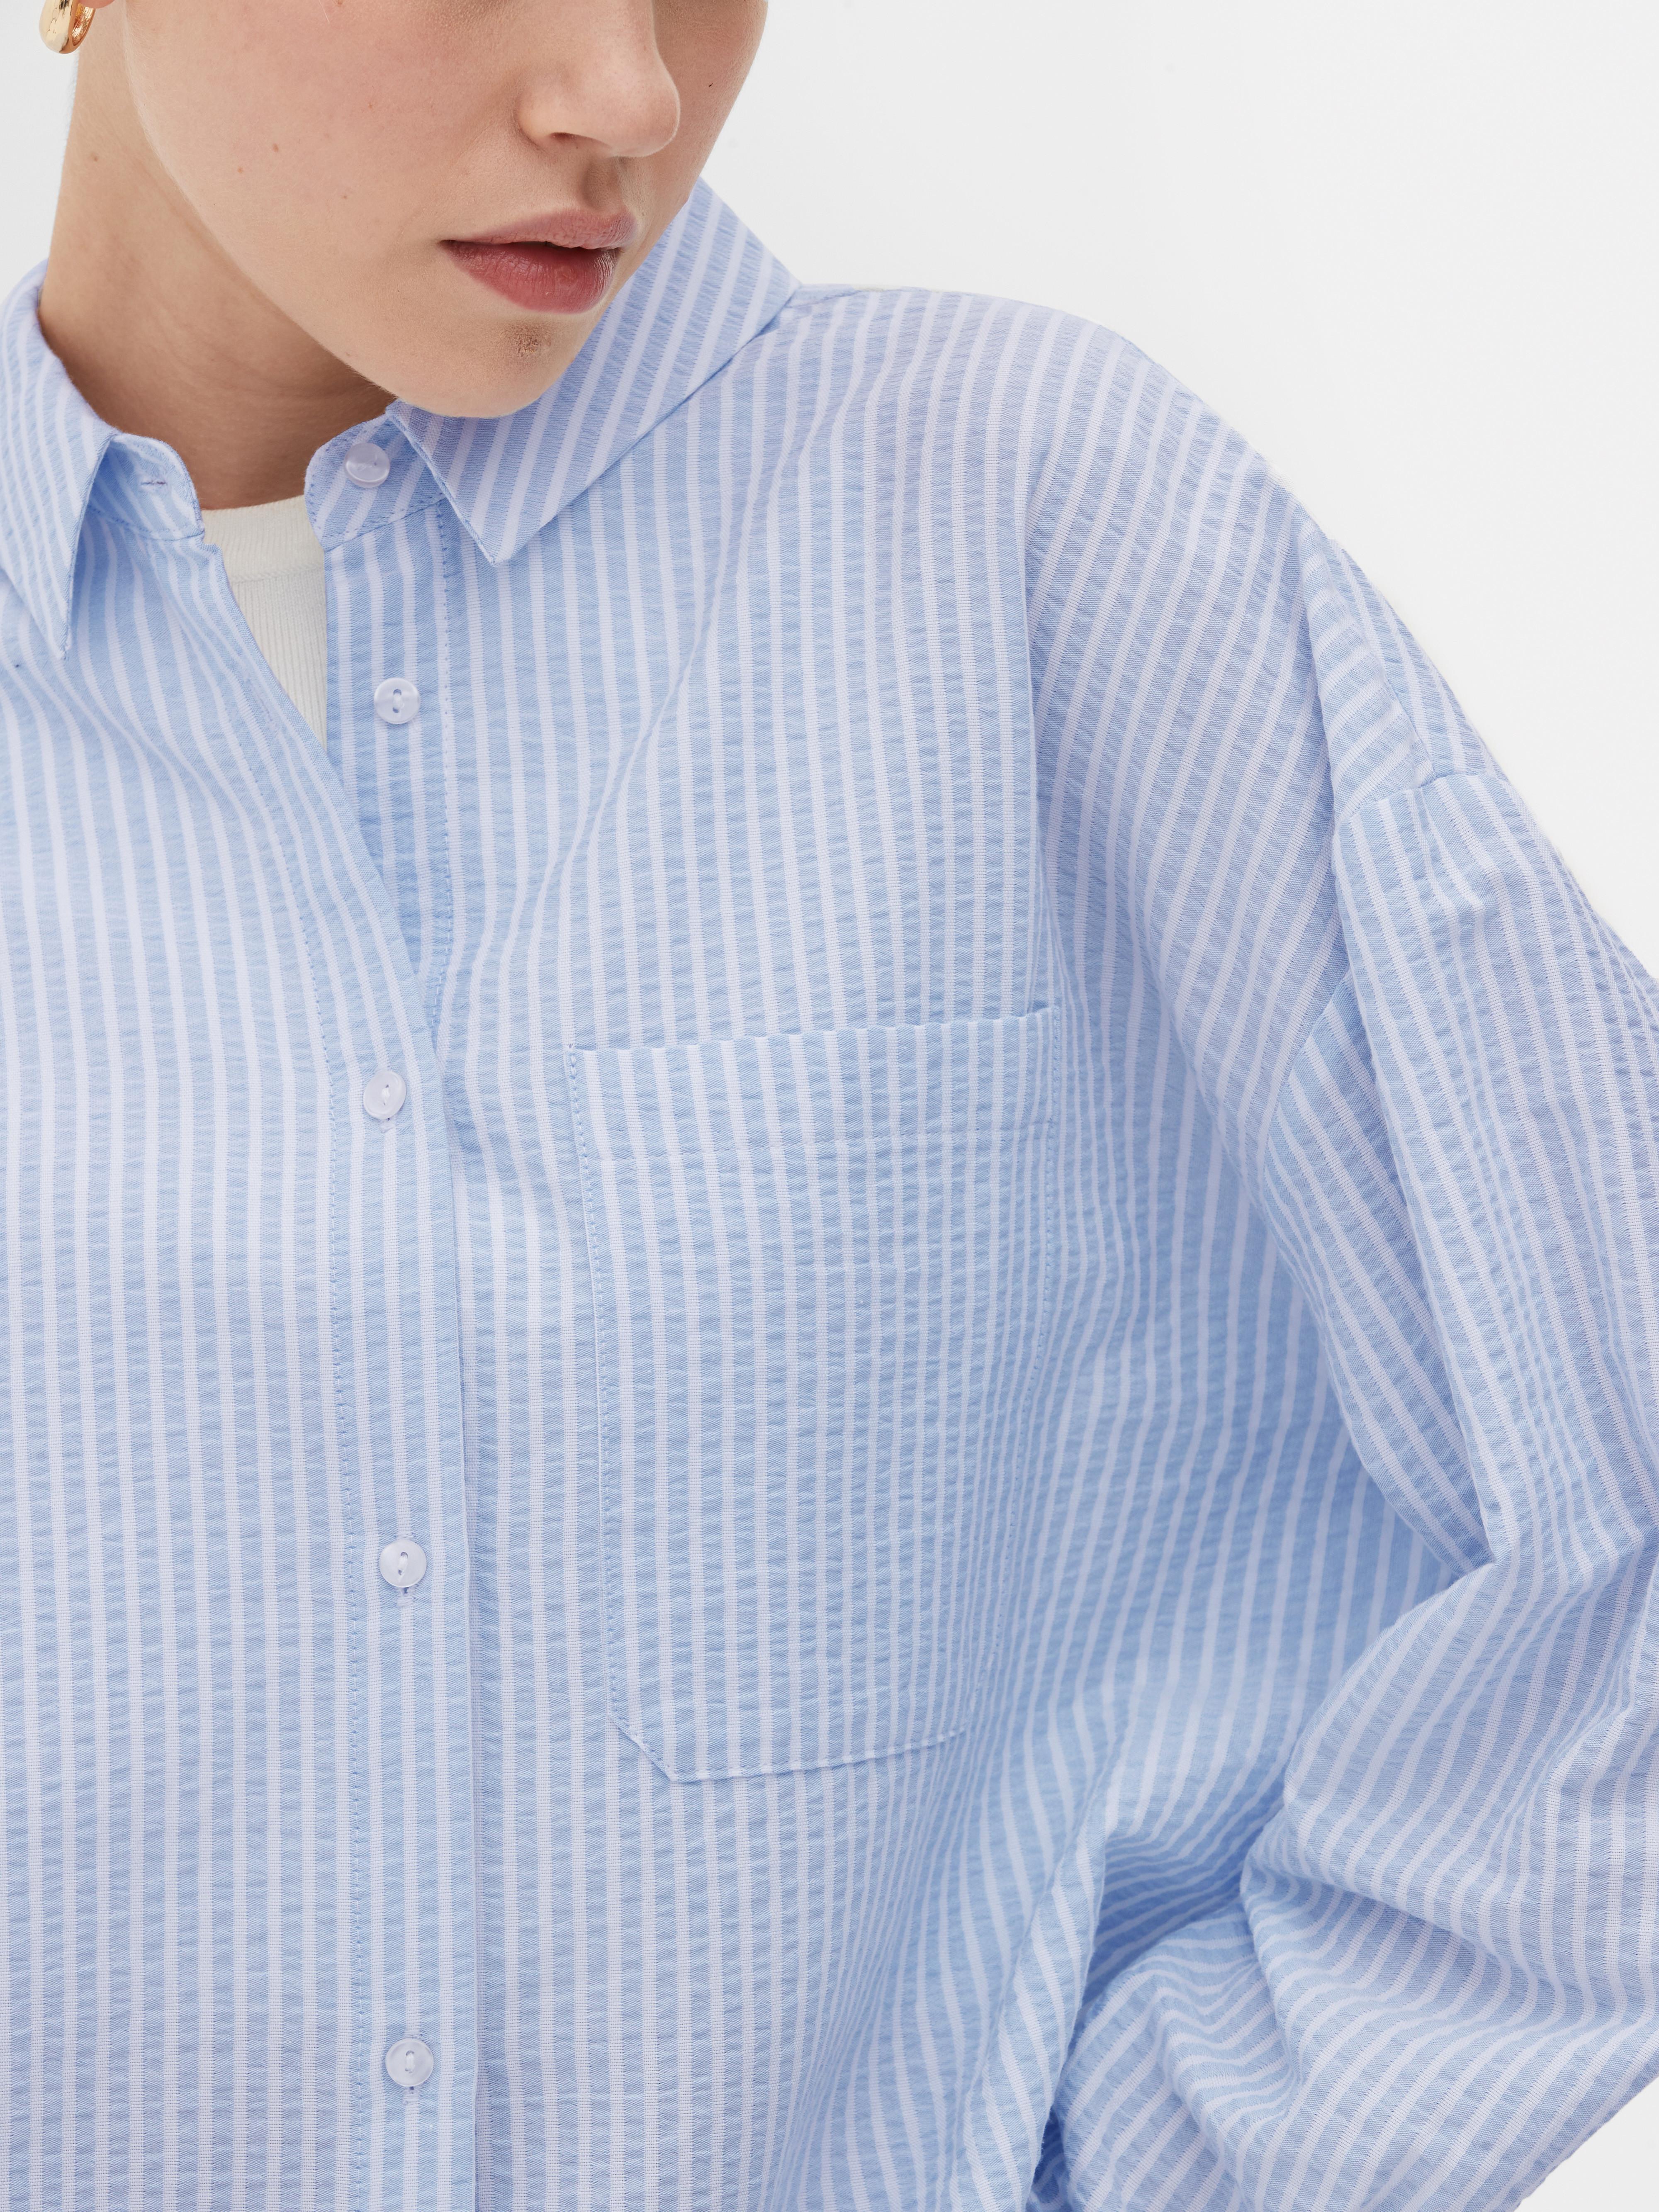 Blue & white striped shirts are seriously trending! From Primark